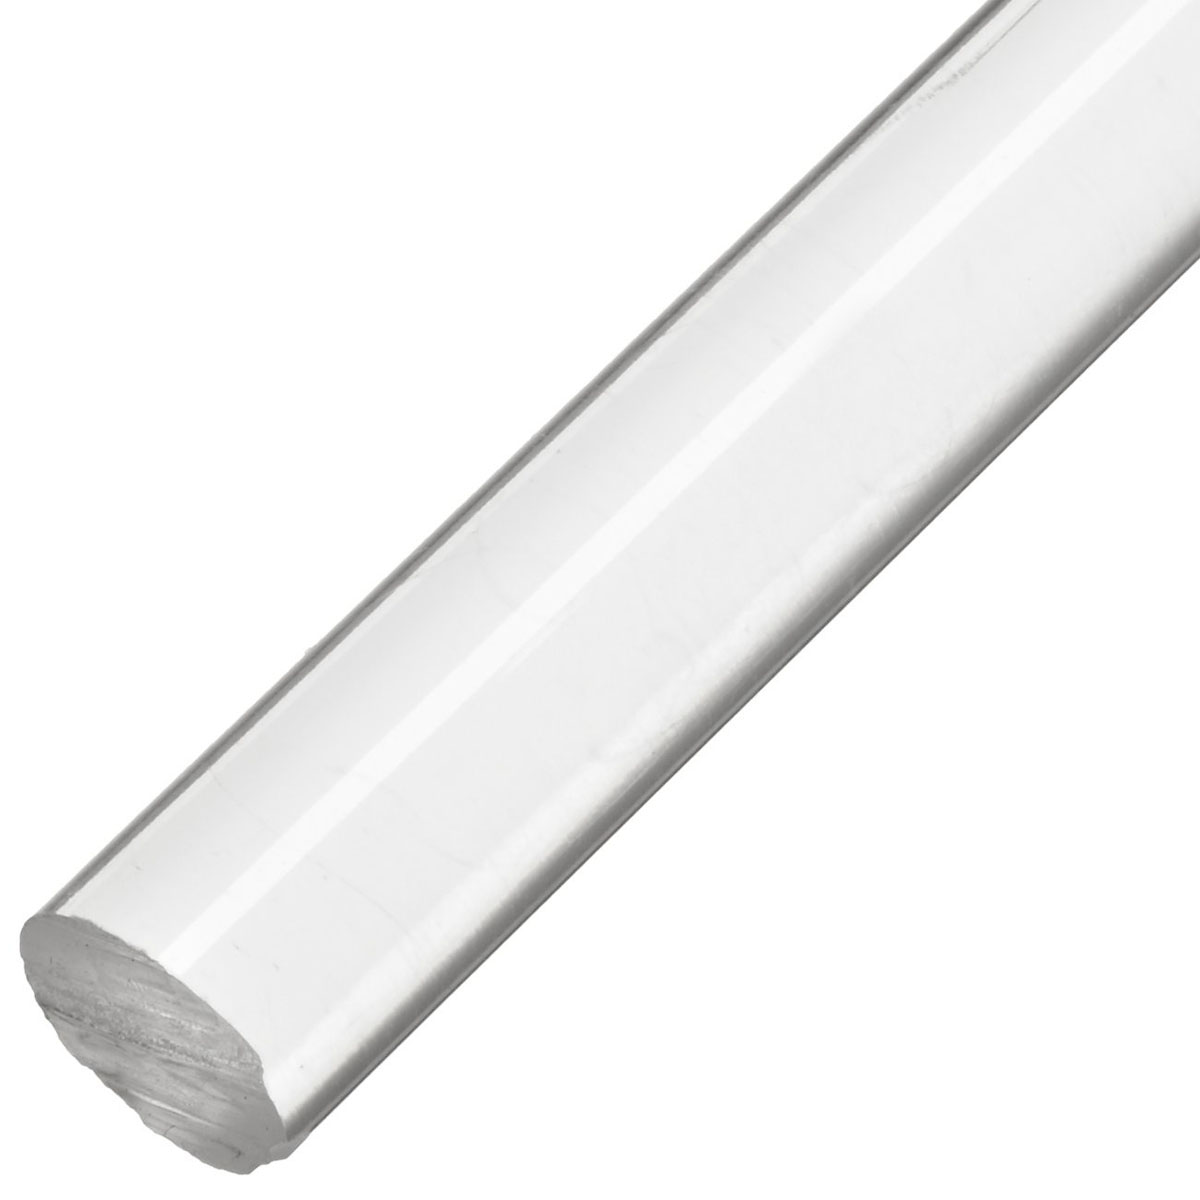 Acrylic Cast Round Rod 12 Length x 2.75 Thick Clear Nominal 